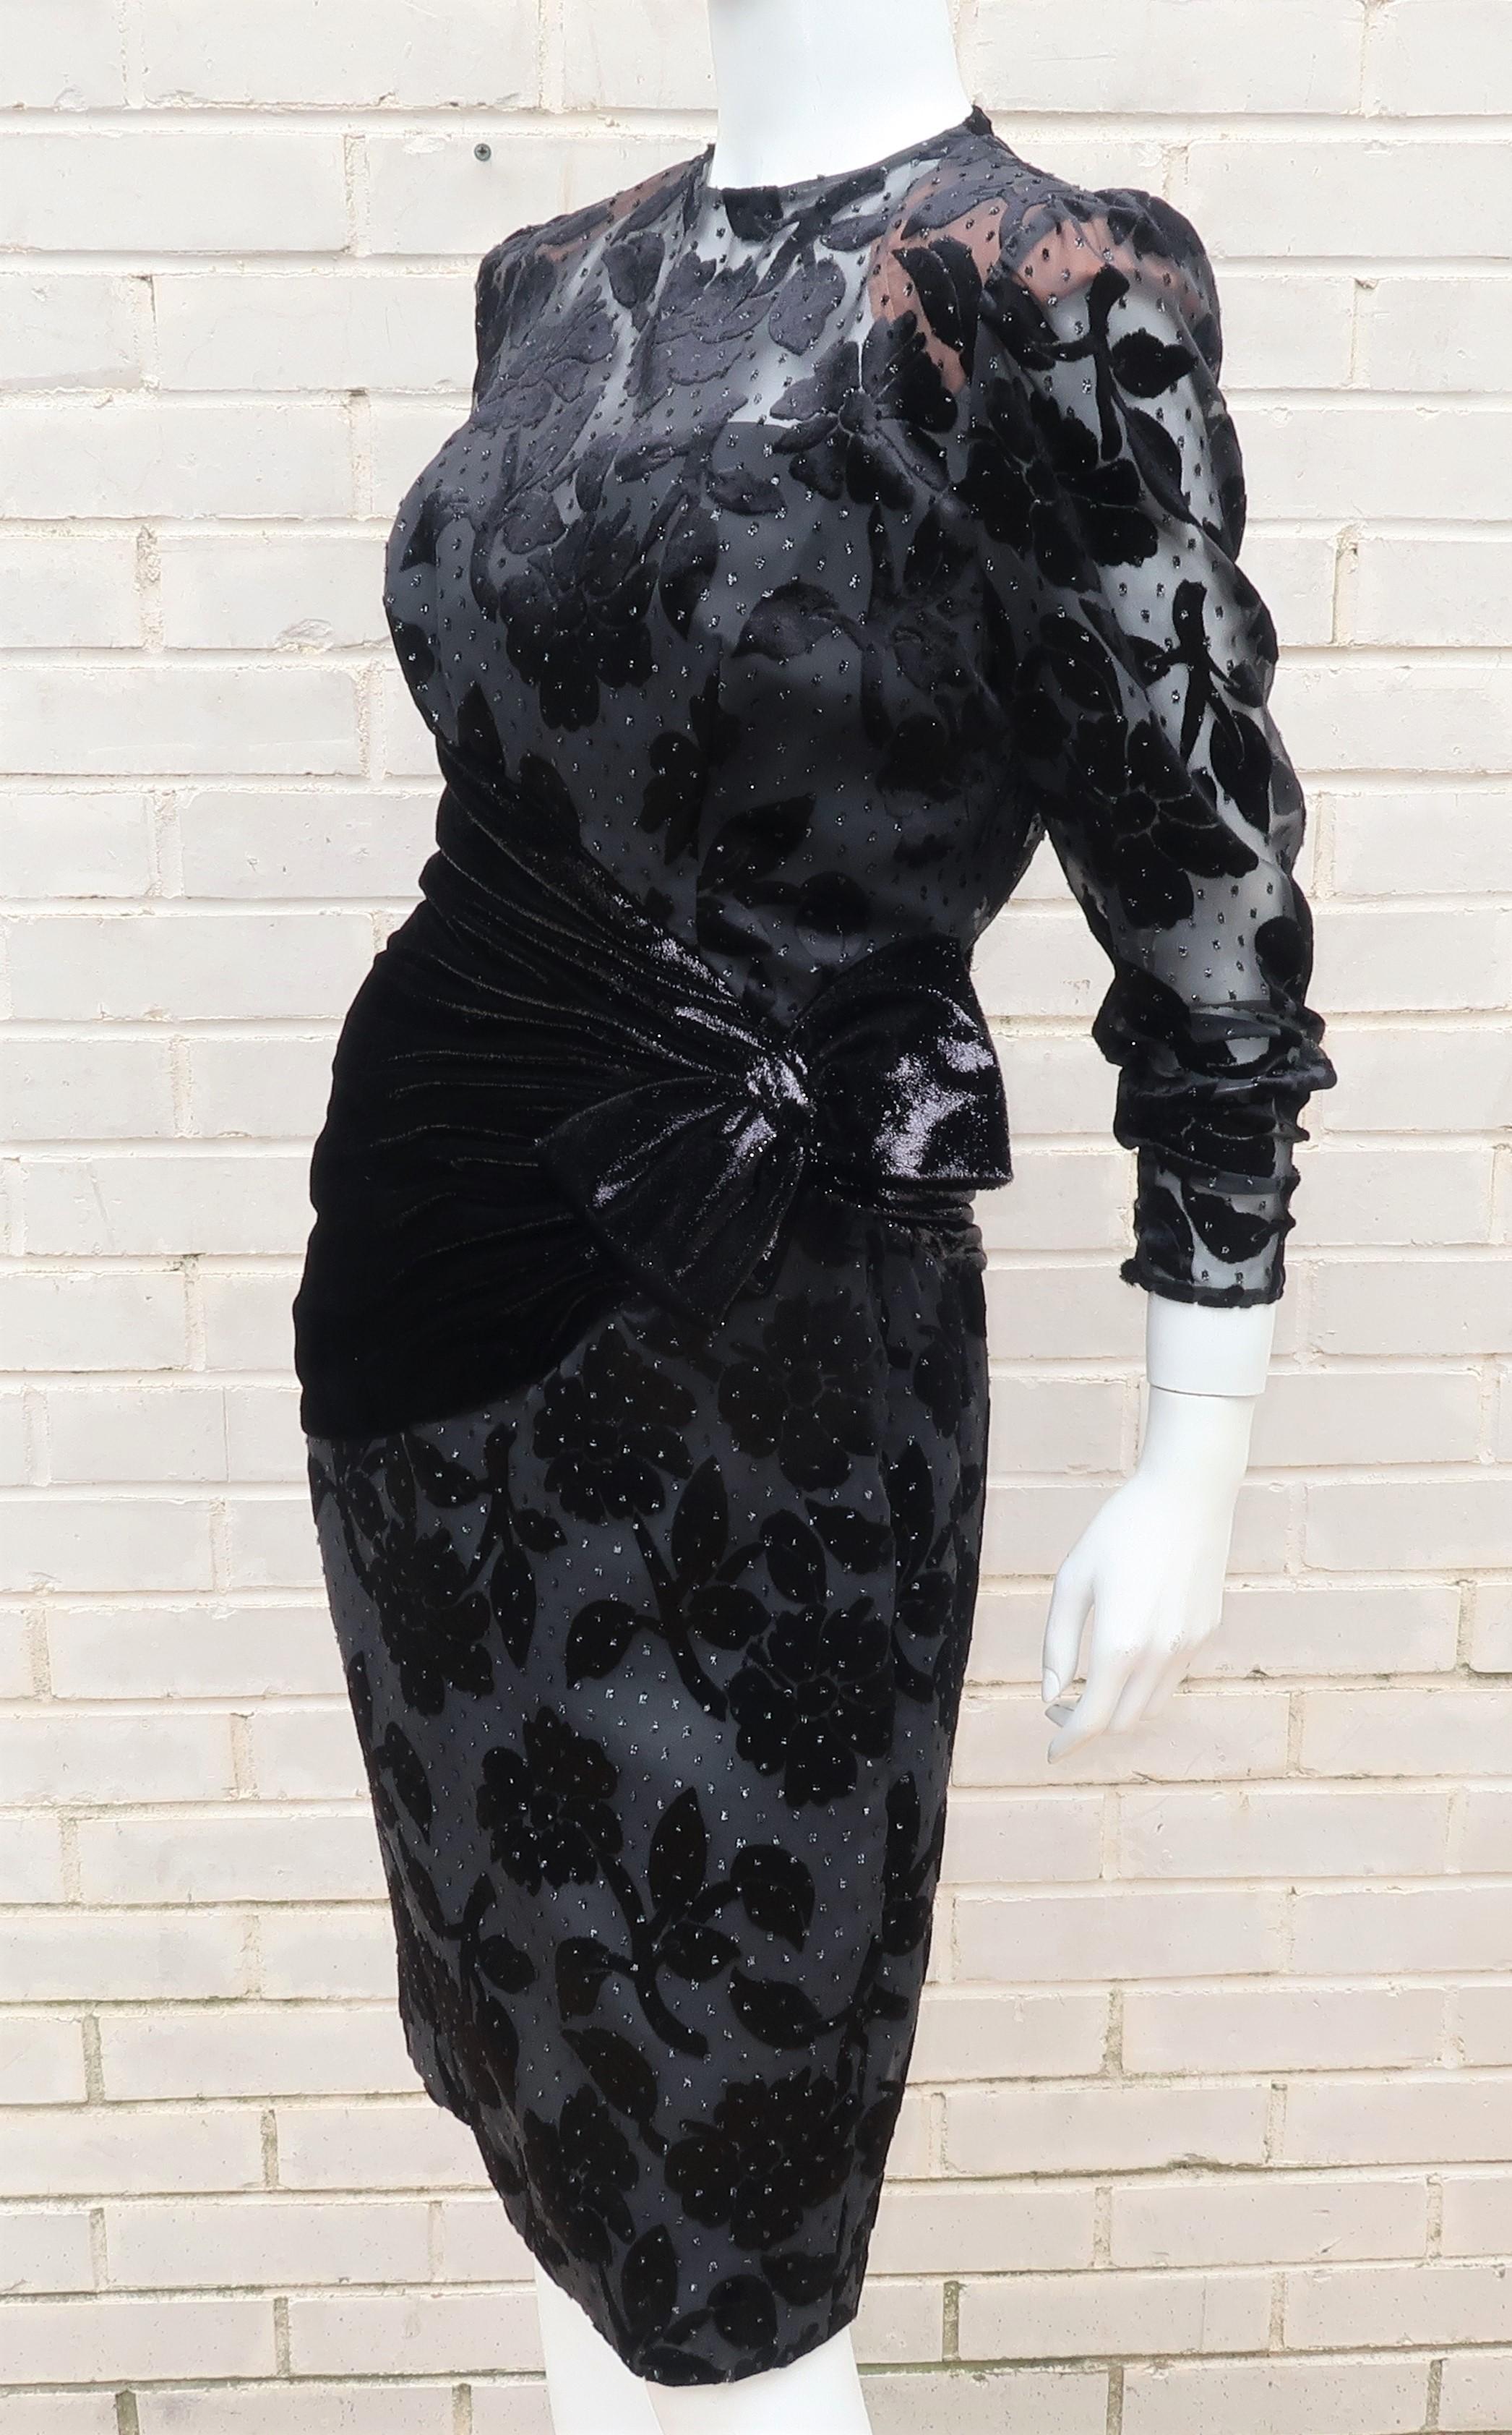 A black cocktail dress by Anne Marie Gabalis for Mignon in a classic 1980's silhouette including strong shoulders and an emphasized waist.  This elegant look is modernized by the combination of a cut velvet in a floral pattern accented by glitter